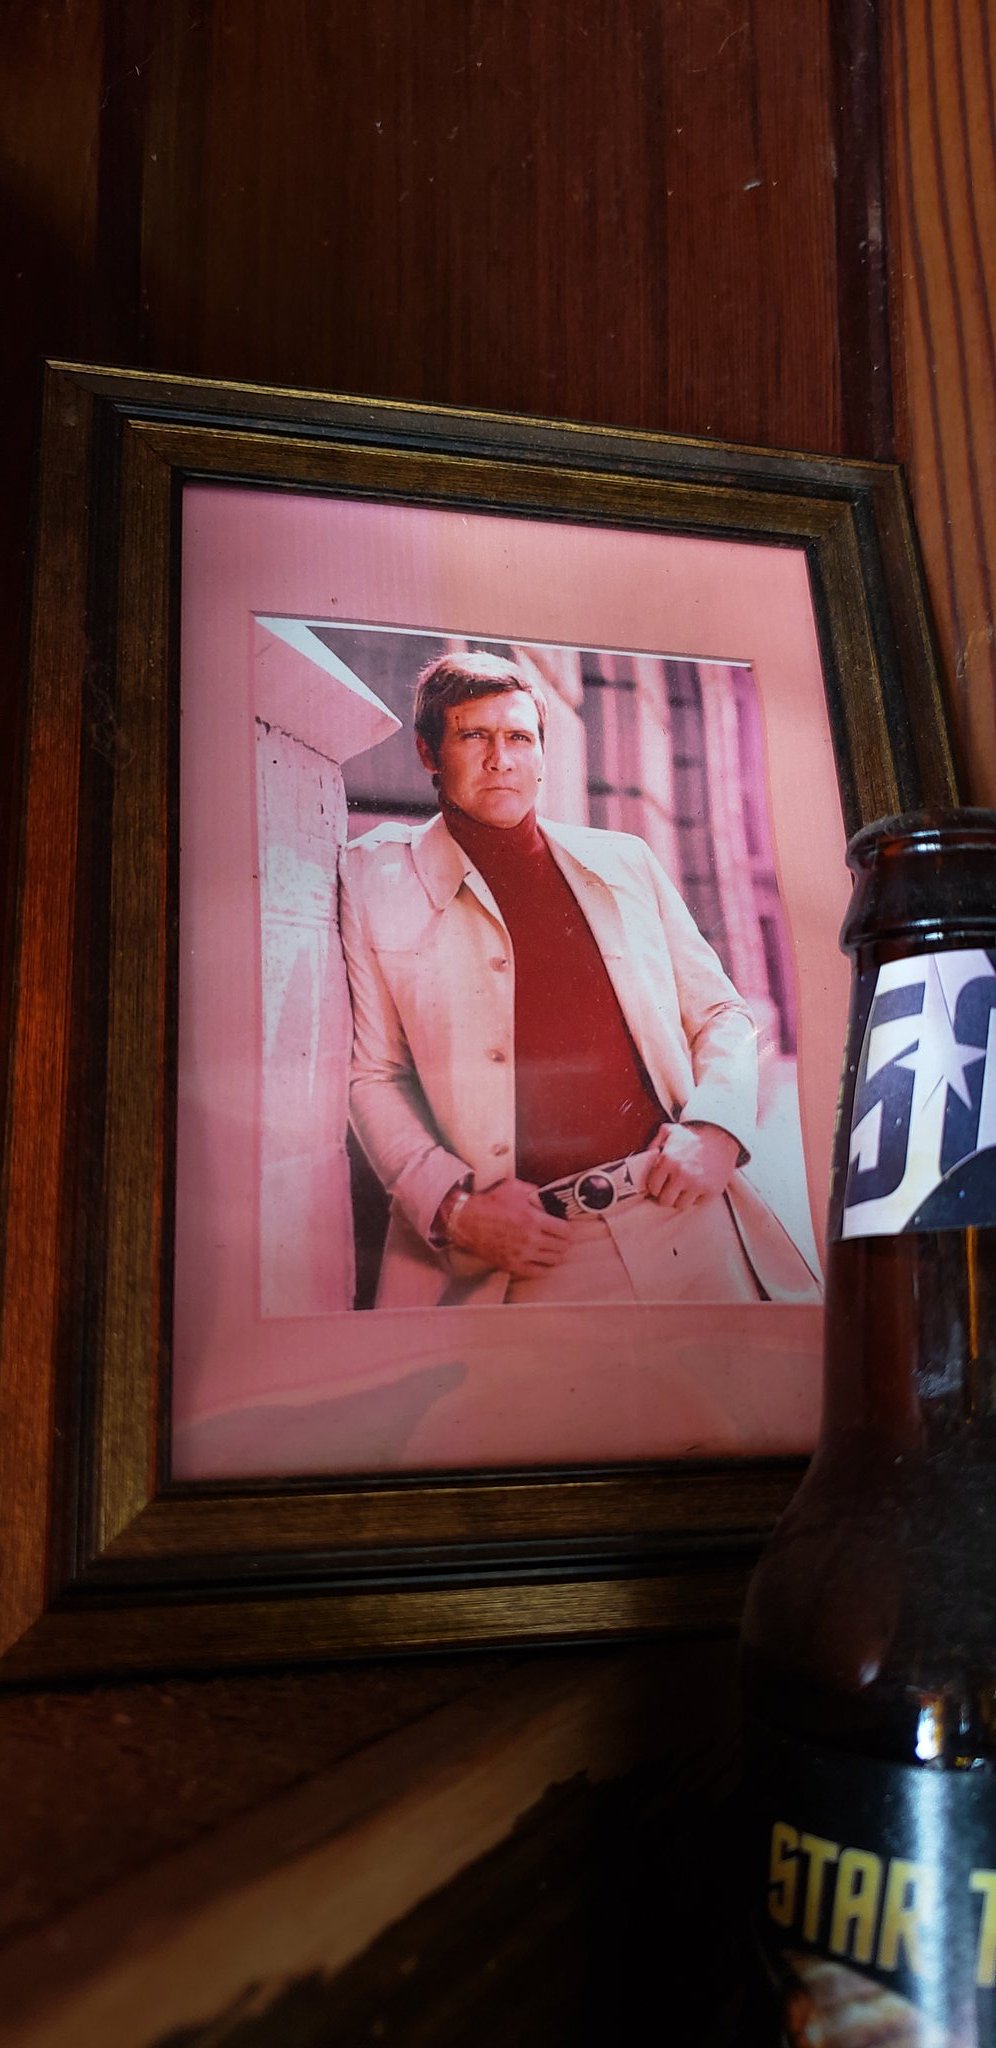 Happy Birthday, Lee Majors!! And thanks for cooling up the bar. 